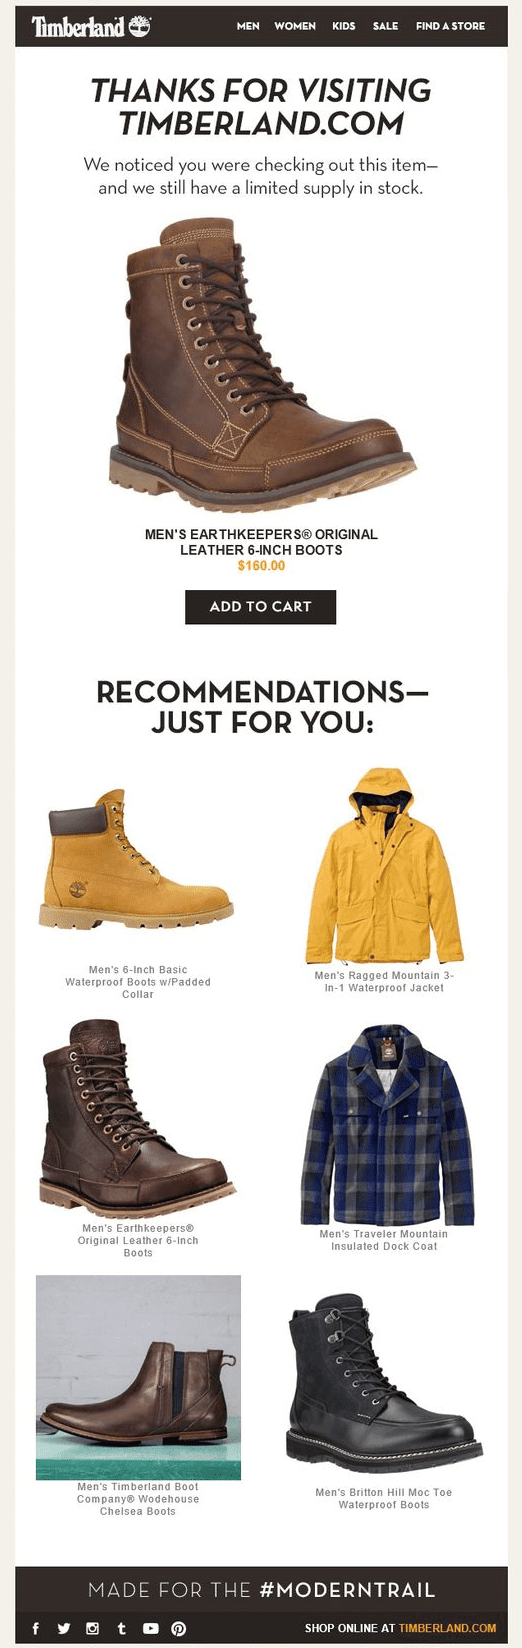 browse abandonment email personalization example by Timberland eCommerce brand